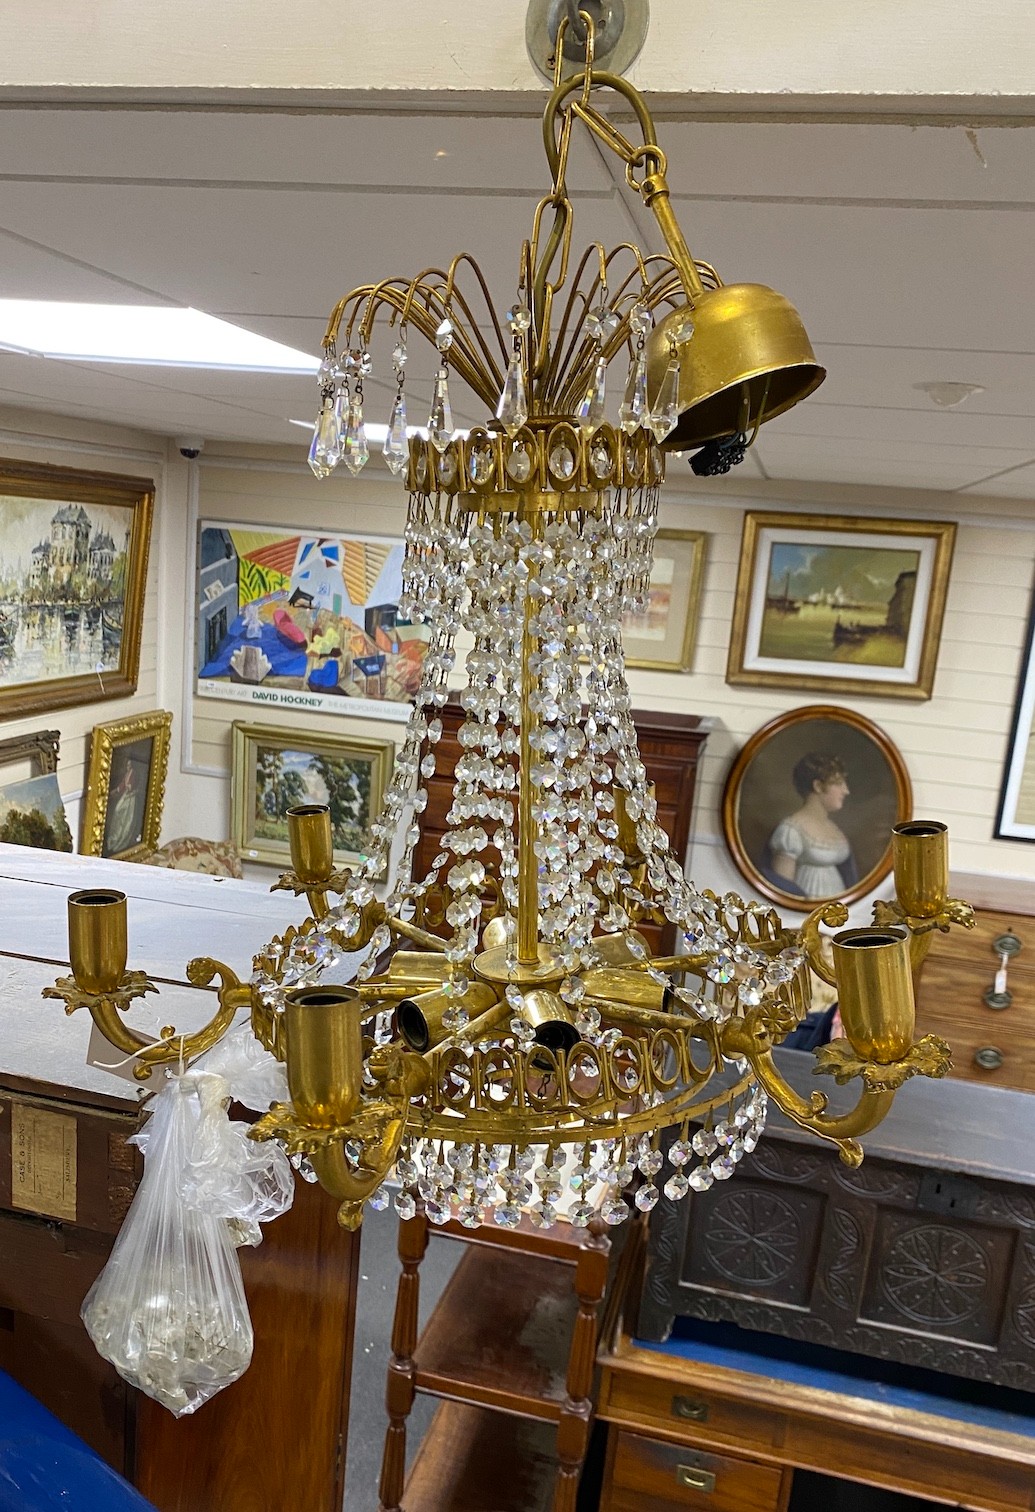 A brass and cut glass ceiling chandelier